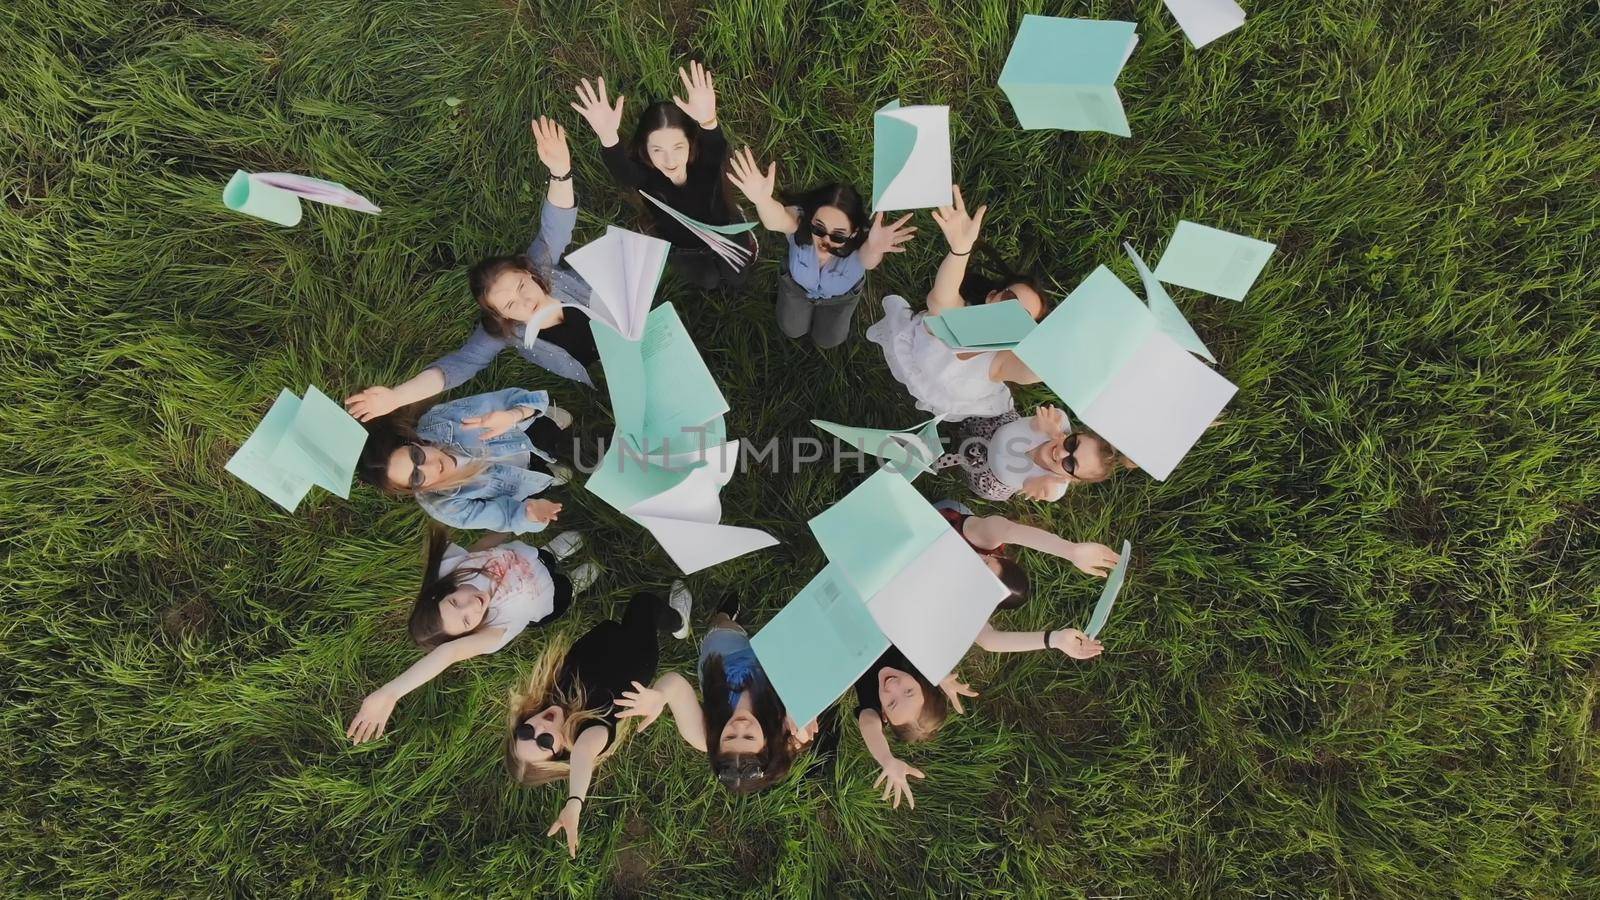 Students toss exercise books on their last day of school. by DovidPro